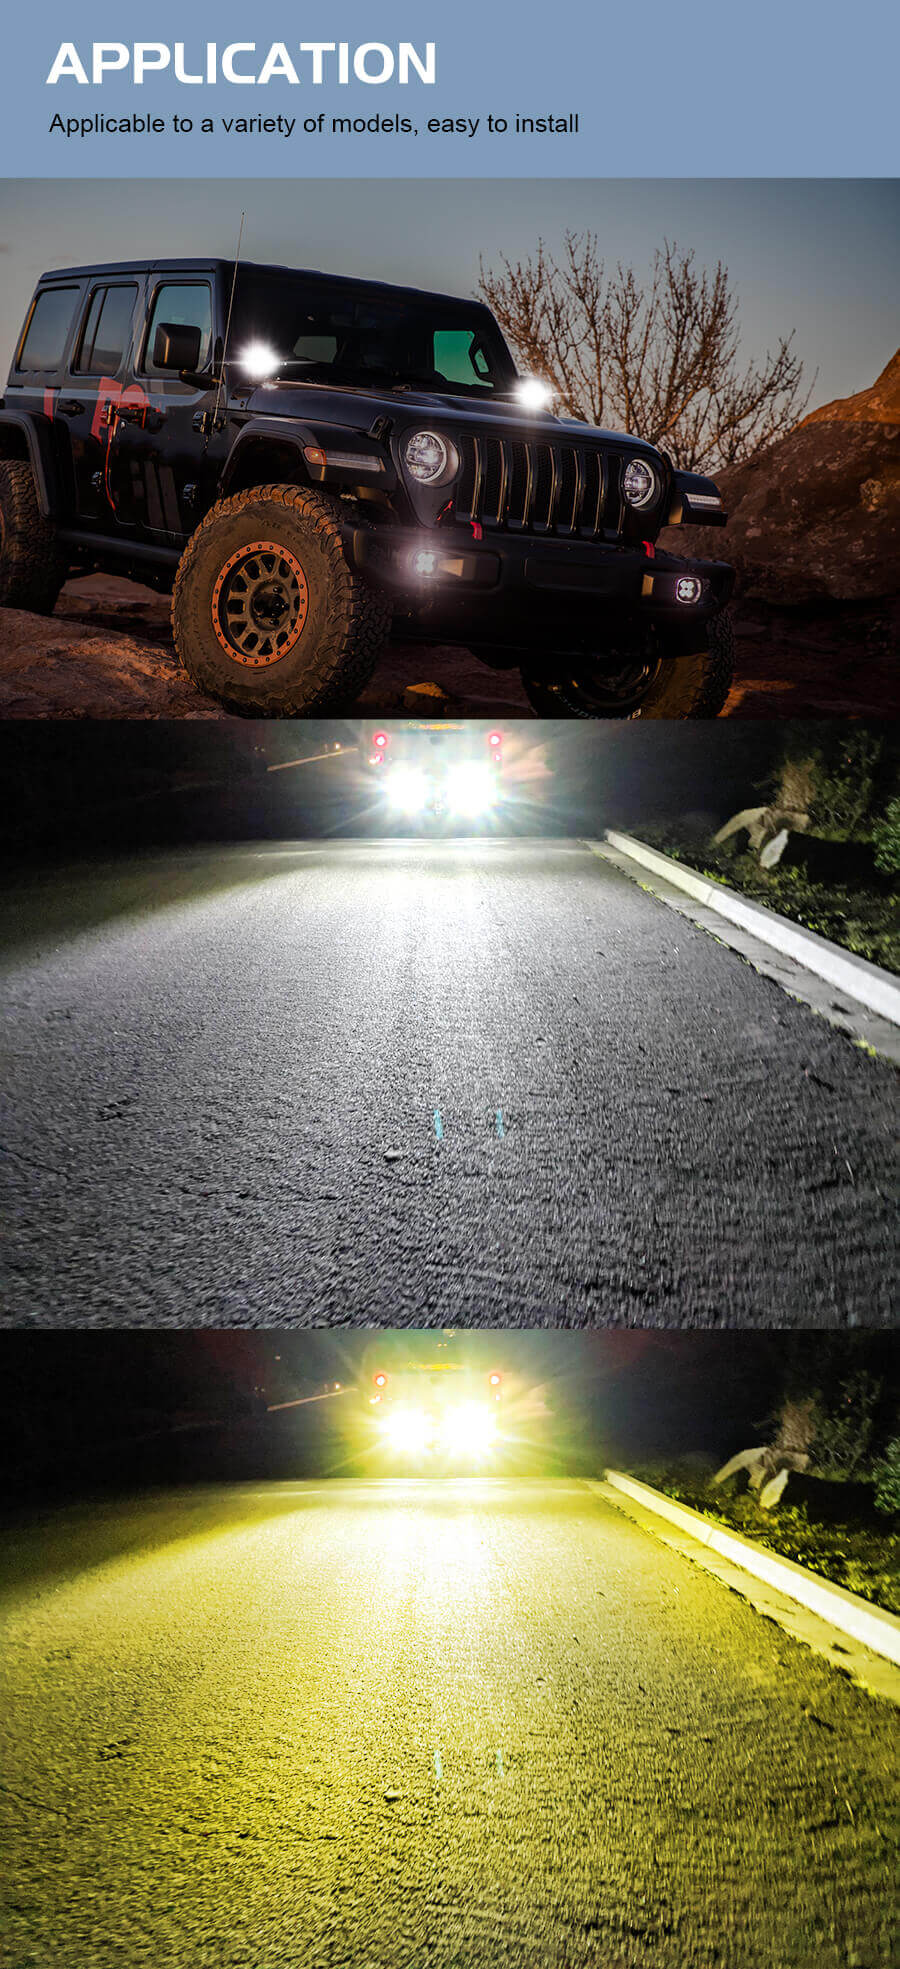 2-6-Inch-Motocycle-Off-Road-External-Dual-Color-Flashing-Led-Work-Light-with-Big-Lens-JG-993B-applic